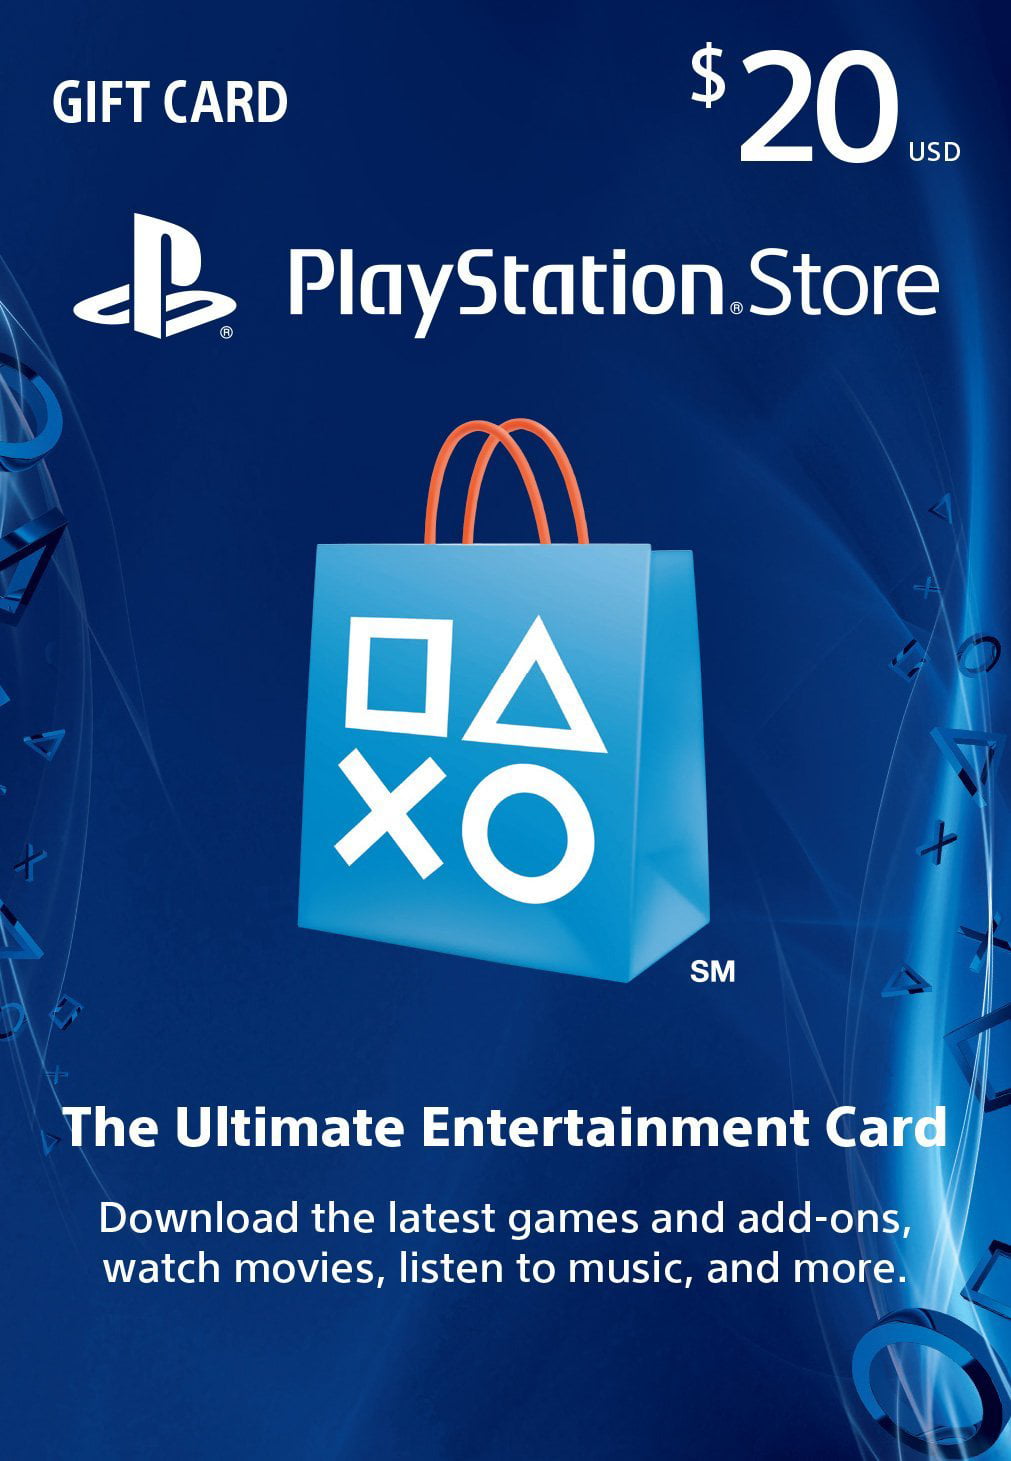 PSN Card US - Playstation Store Card - Digital Delivery in Seconds